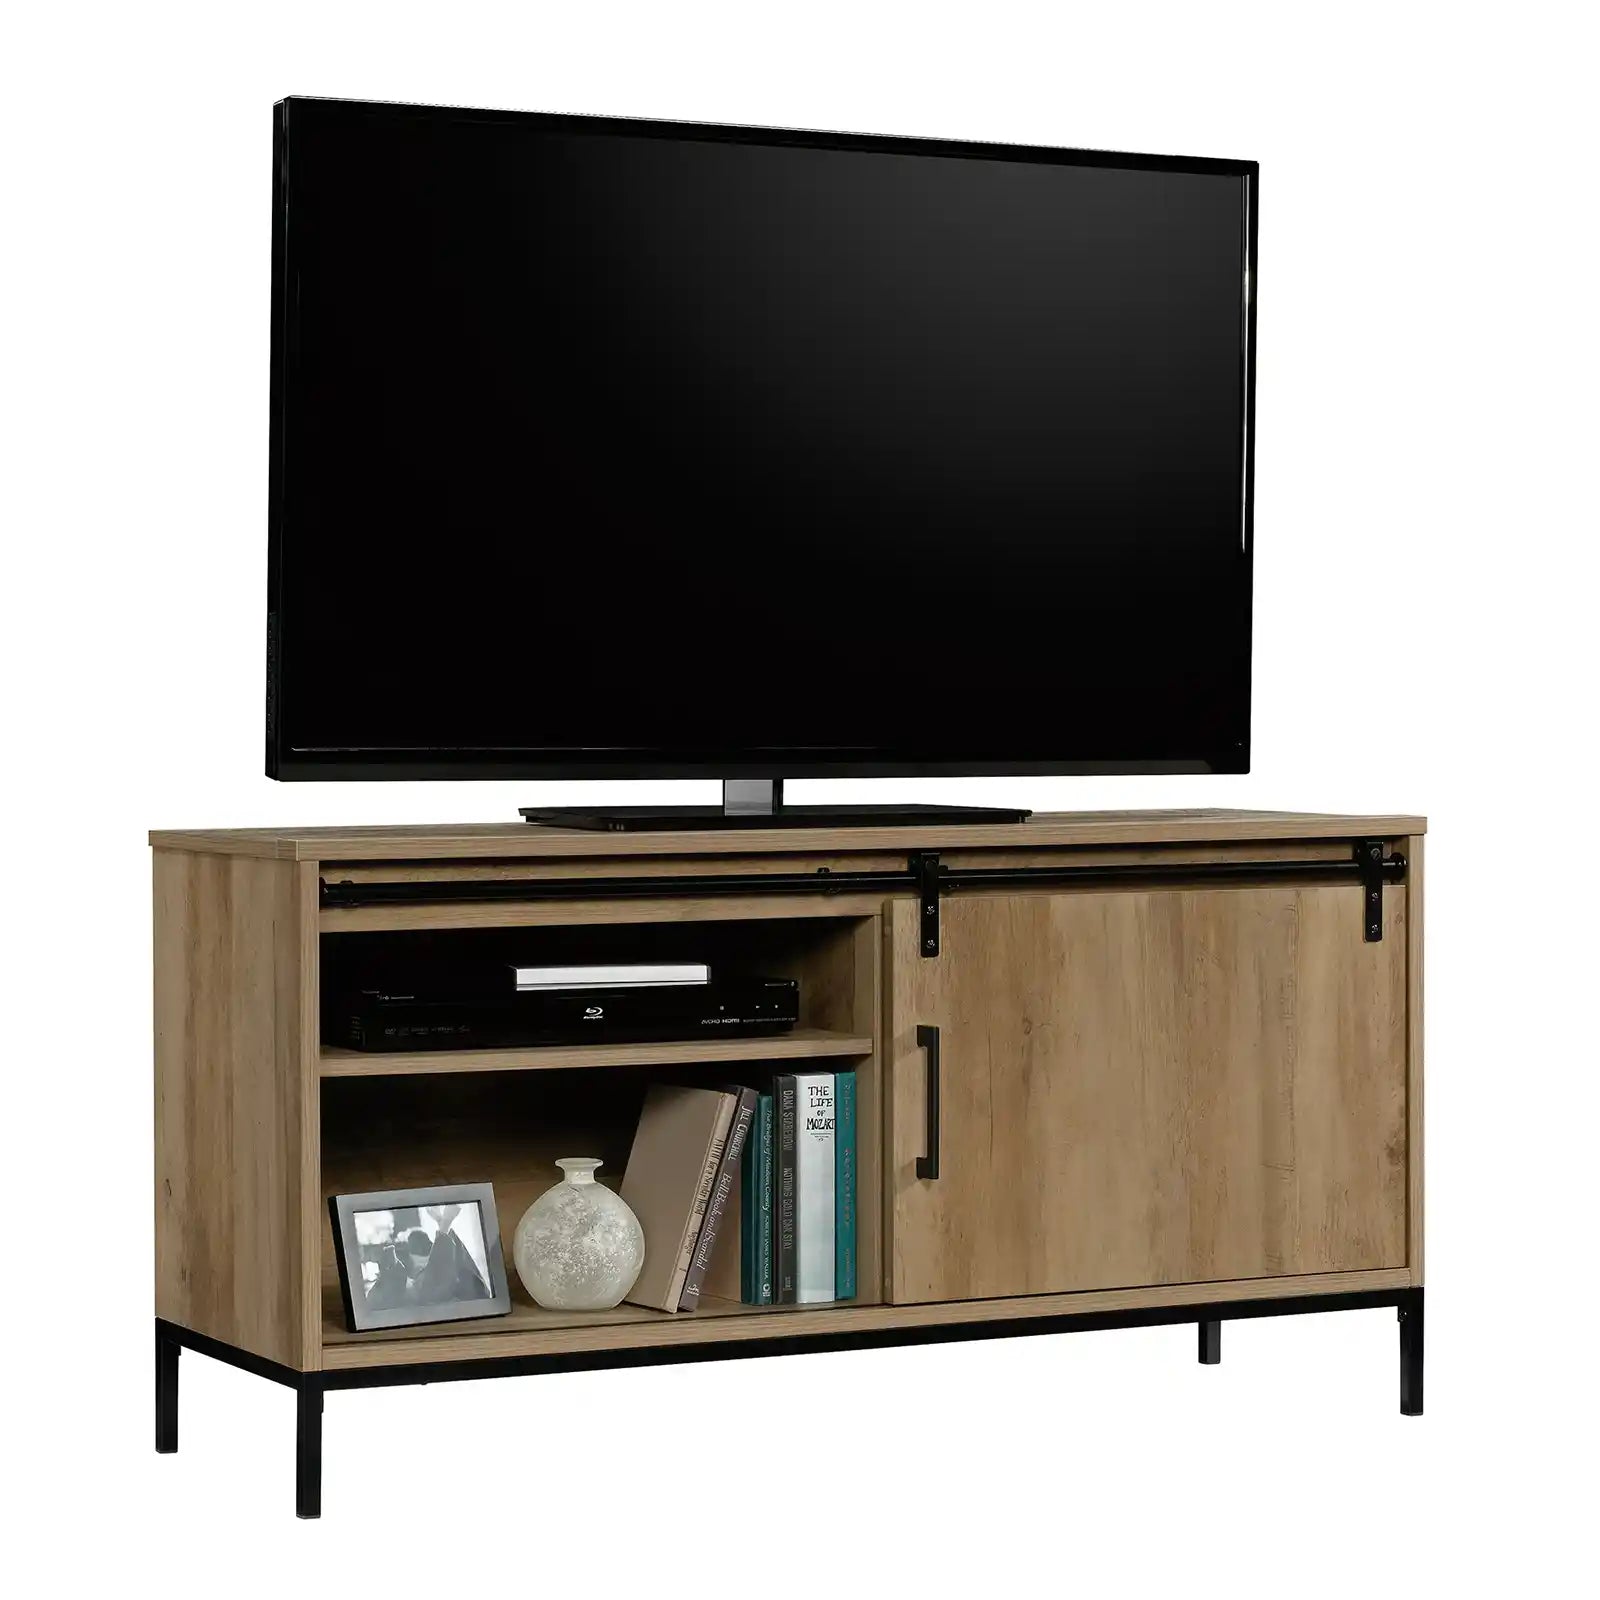 TV Stand, for TVs up to 54", Rustic Weathered Oak Finish